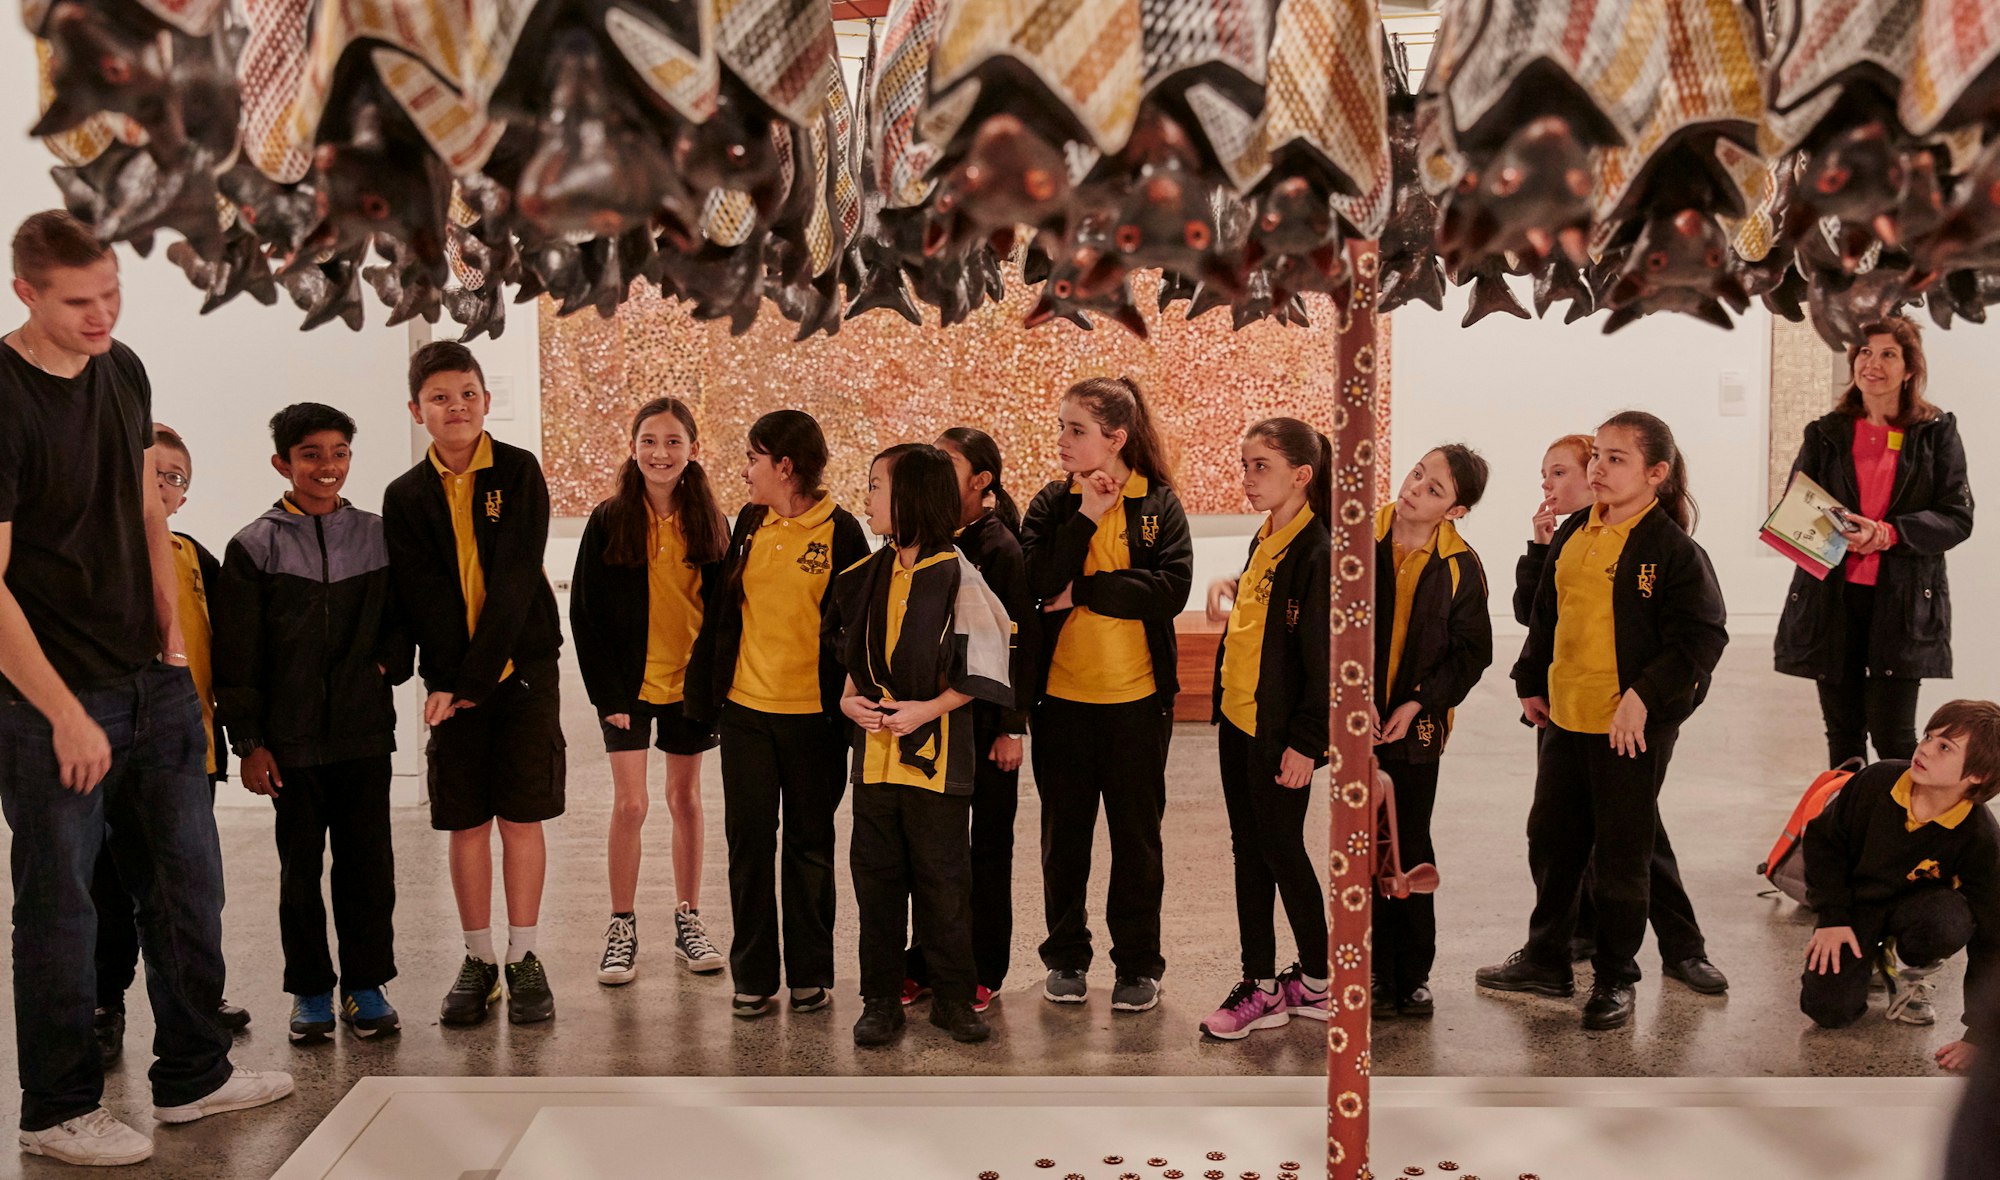 Students from Hilltop Road Public School, Merrylands visit the Art Gallery of NSW for Art Pathways